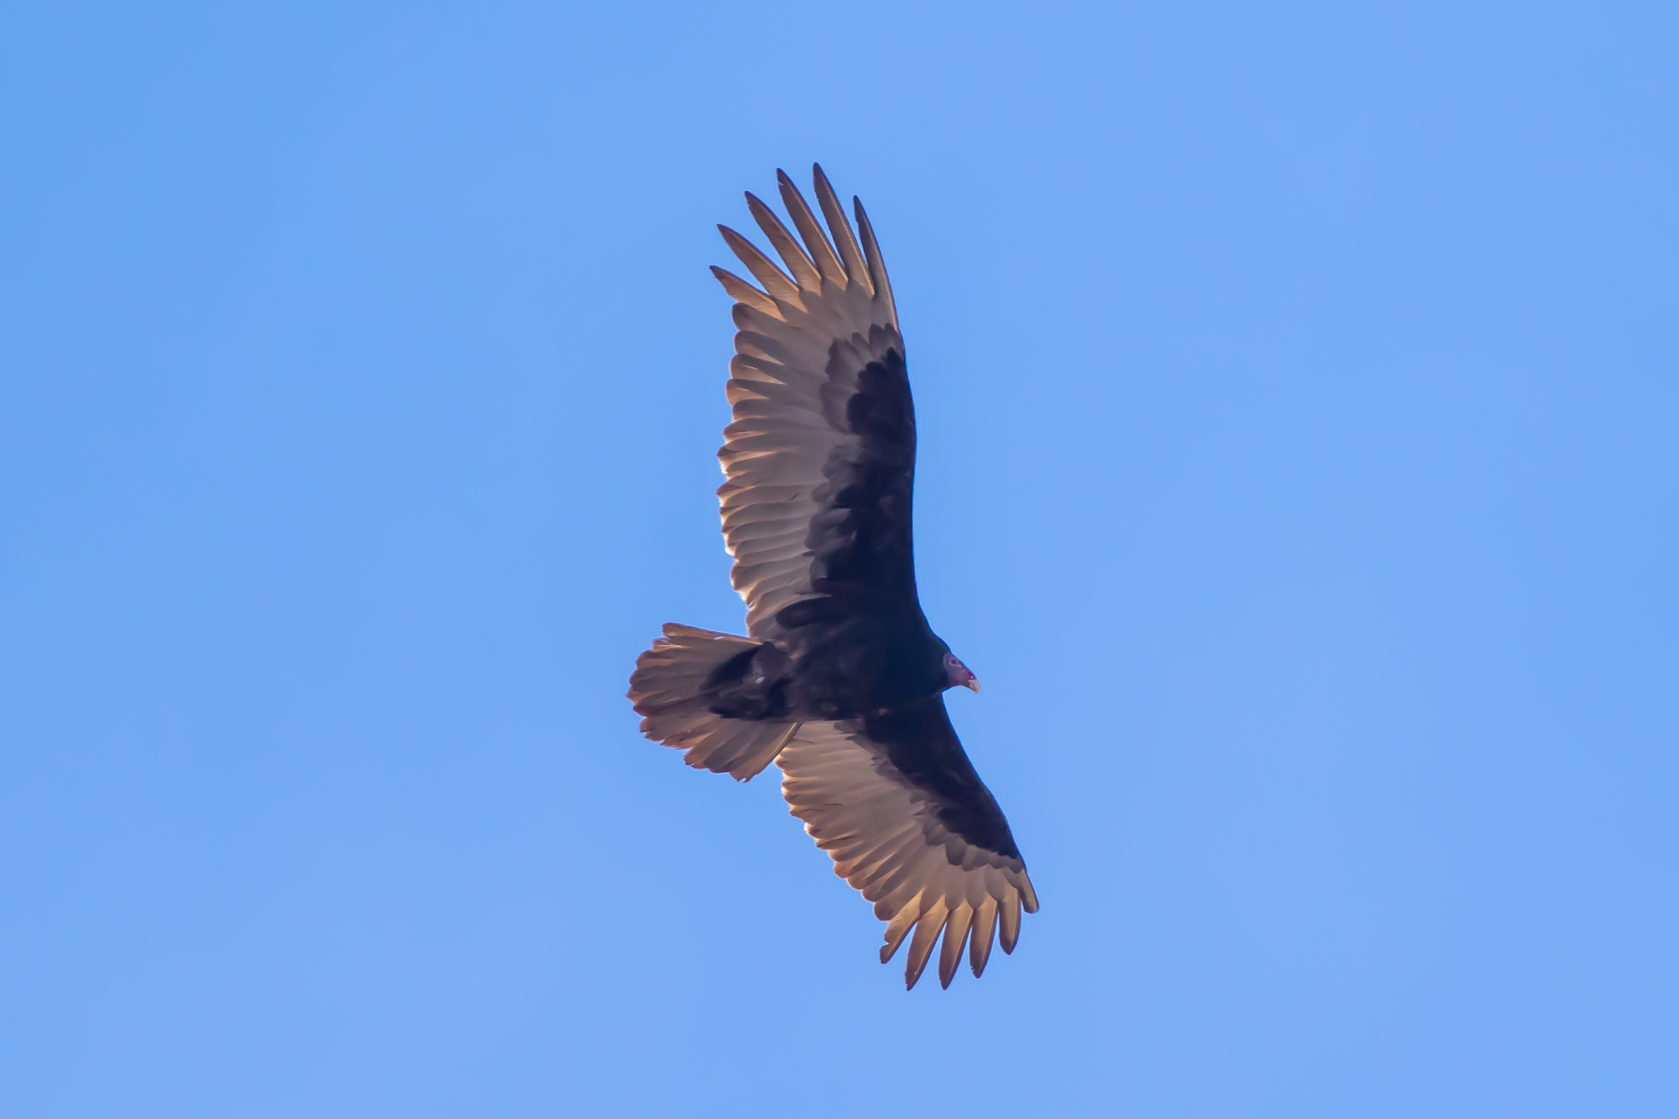 Hard to choose between gruesome roadside dining or sublime, soaring magnificence. But, here’s the magnificence. Large bird with small red head, black body and arms, and broad-spread wings with white trailing edges, soars in a blue sky. Sunlight edges its wings in gold. Turkey Vulture.